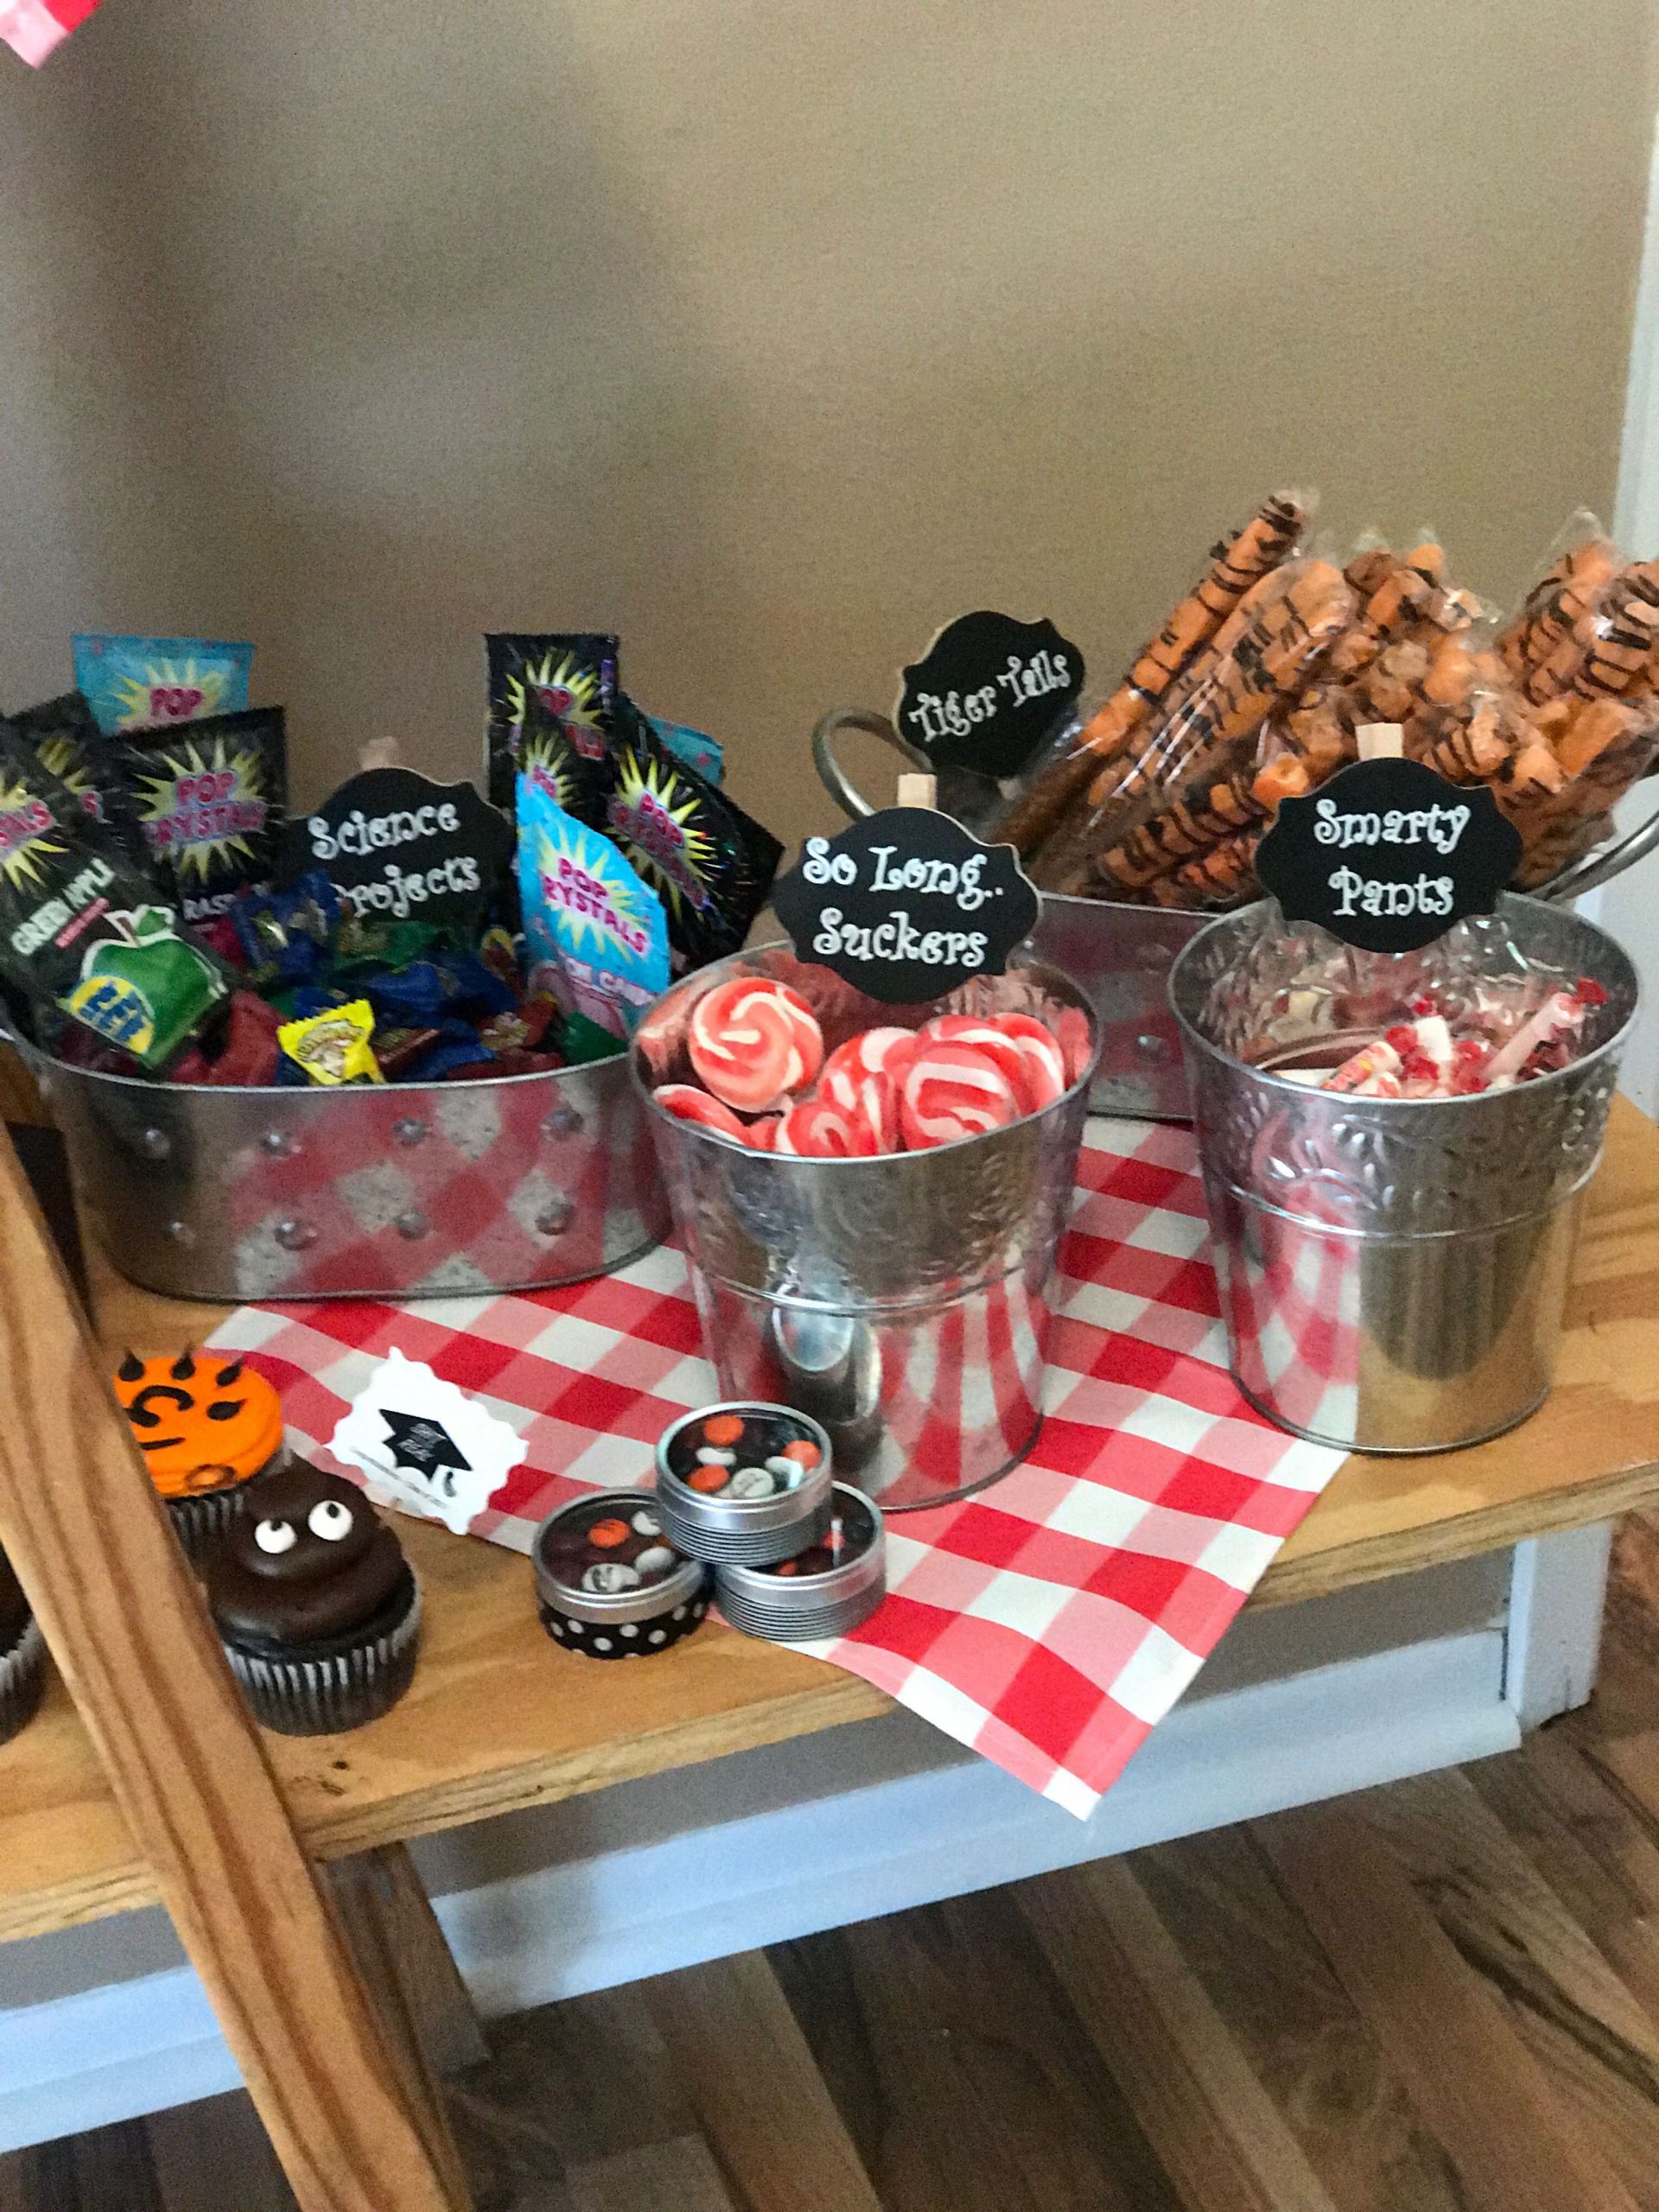 Candy Buffet Ideas For Graduation Party
 Graduation party candy buffet suggestions I tried to